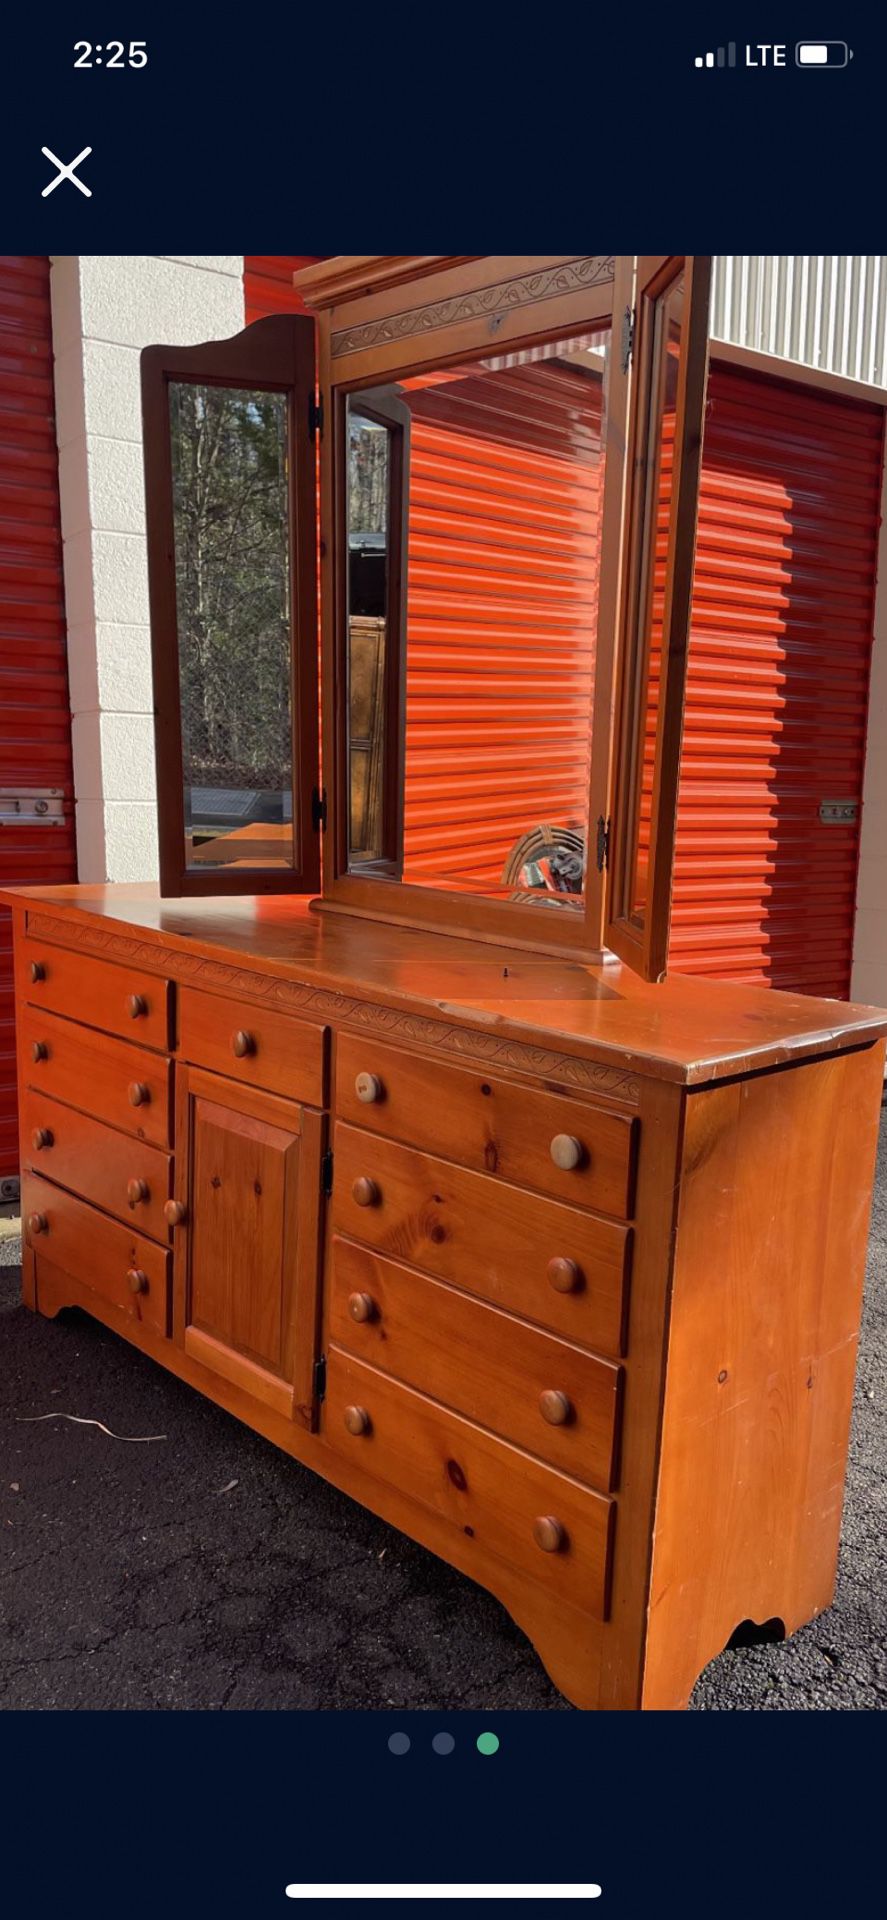 Quality Real Wood Long Dresser With Big drawers, Big Mirror. Drawers Sliding Smoothly Great Conditipn